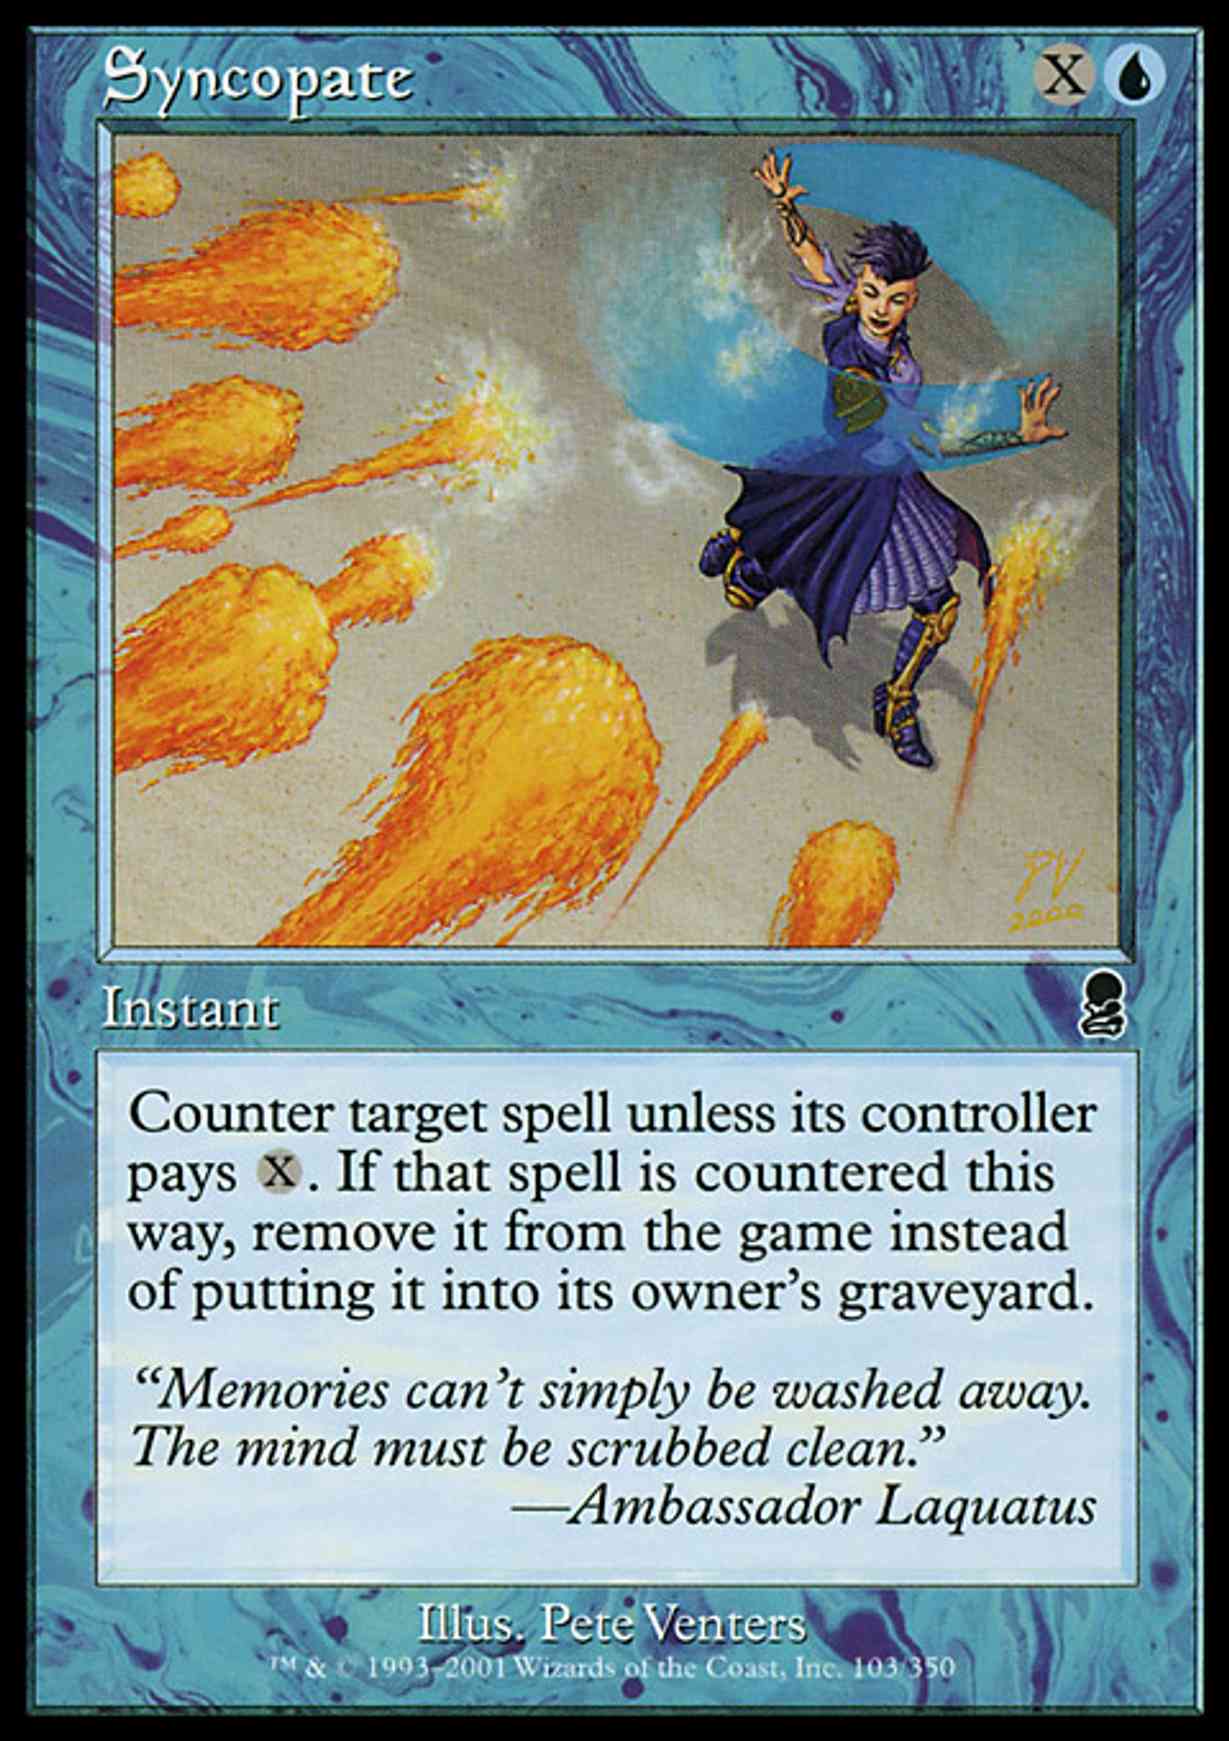 Syncopate magic card front